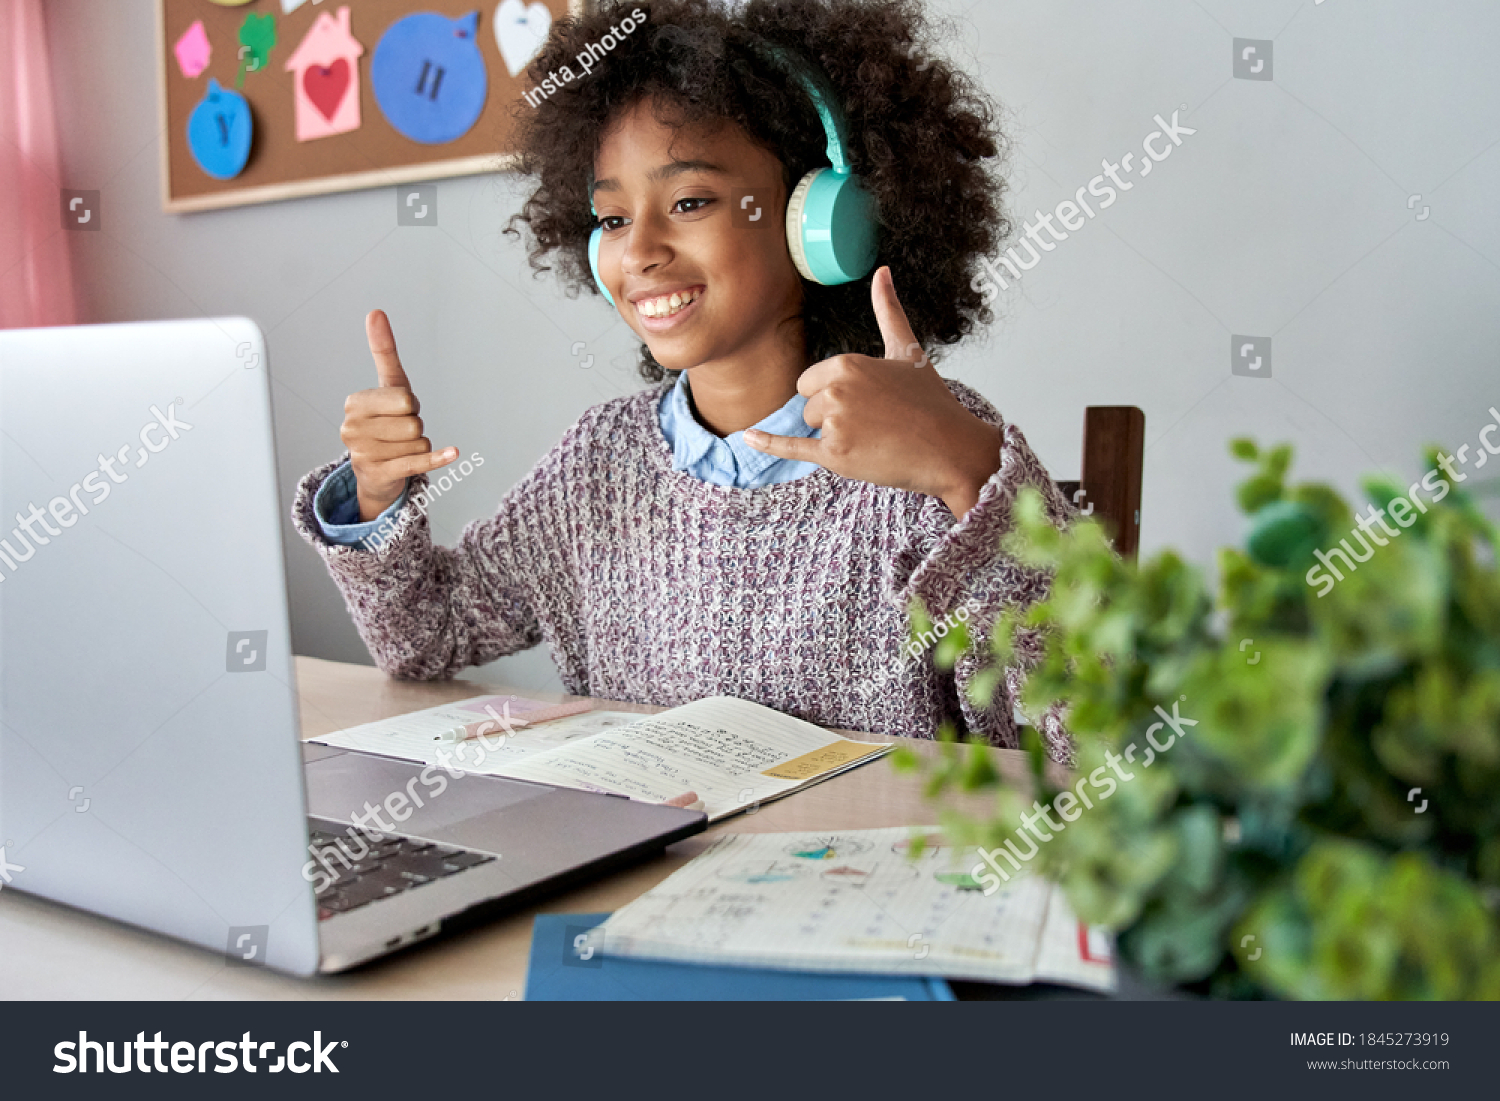 Smiling african mute child school girl learning online class on laptop communicating with teacher by video conference call using sign language showing play hand gesture on virtual therapy lesson. #1845273919